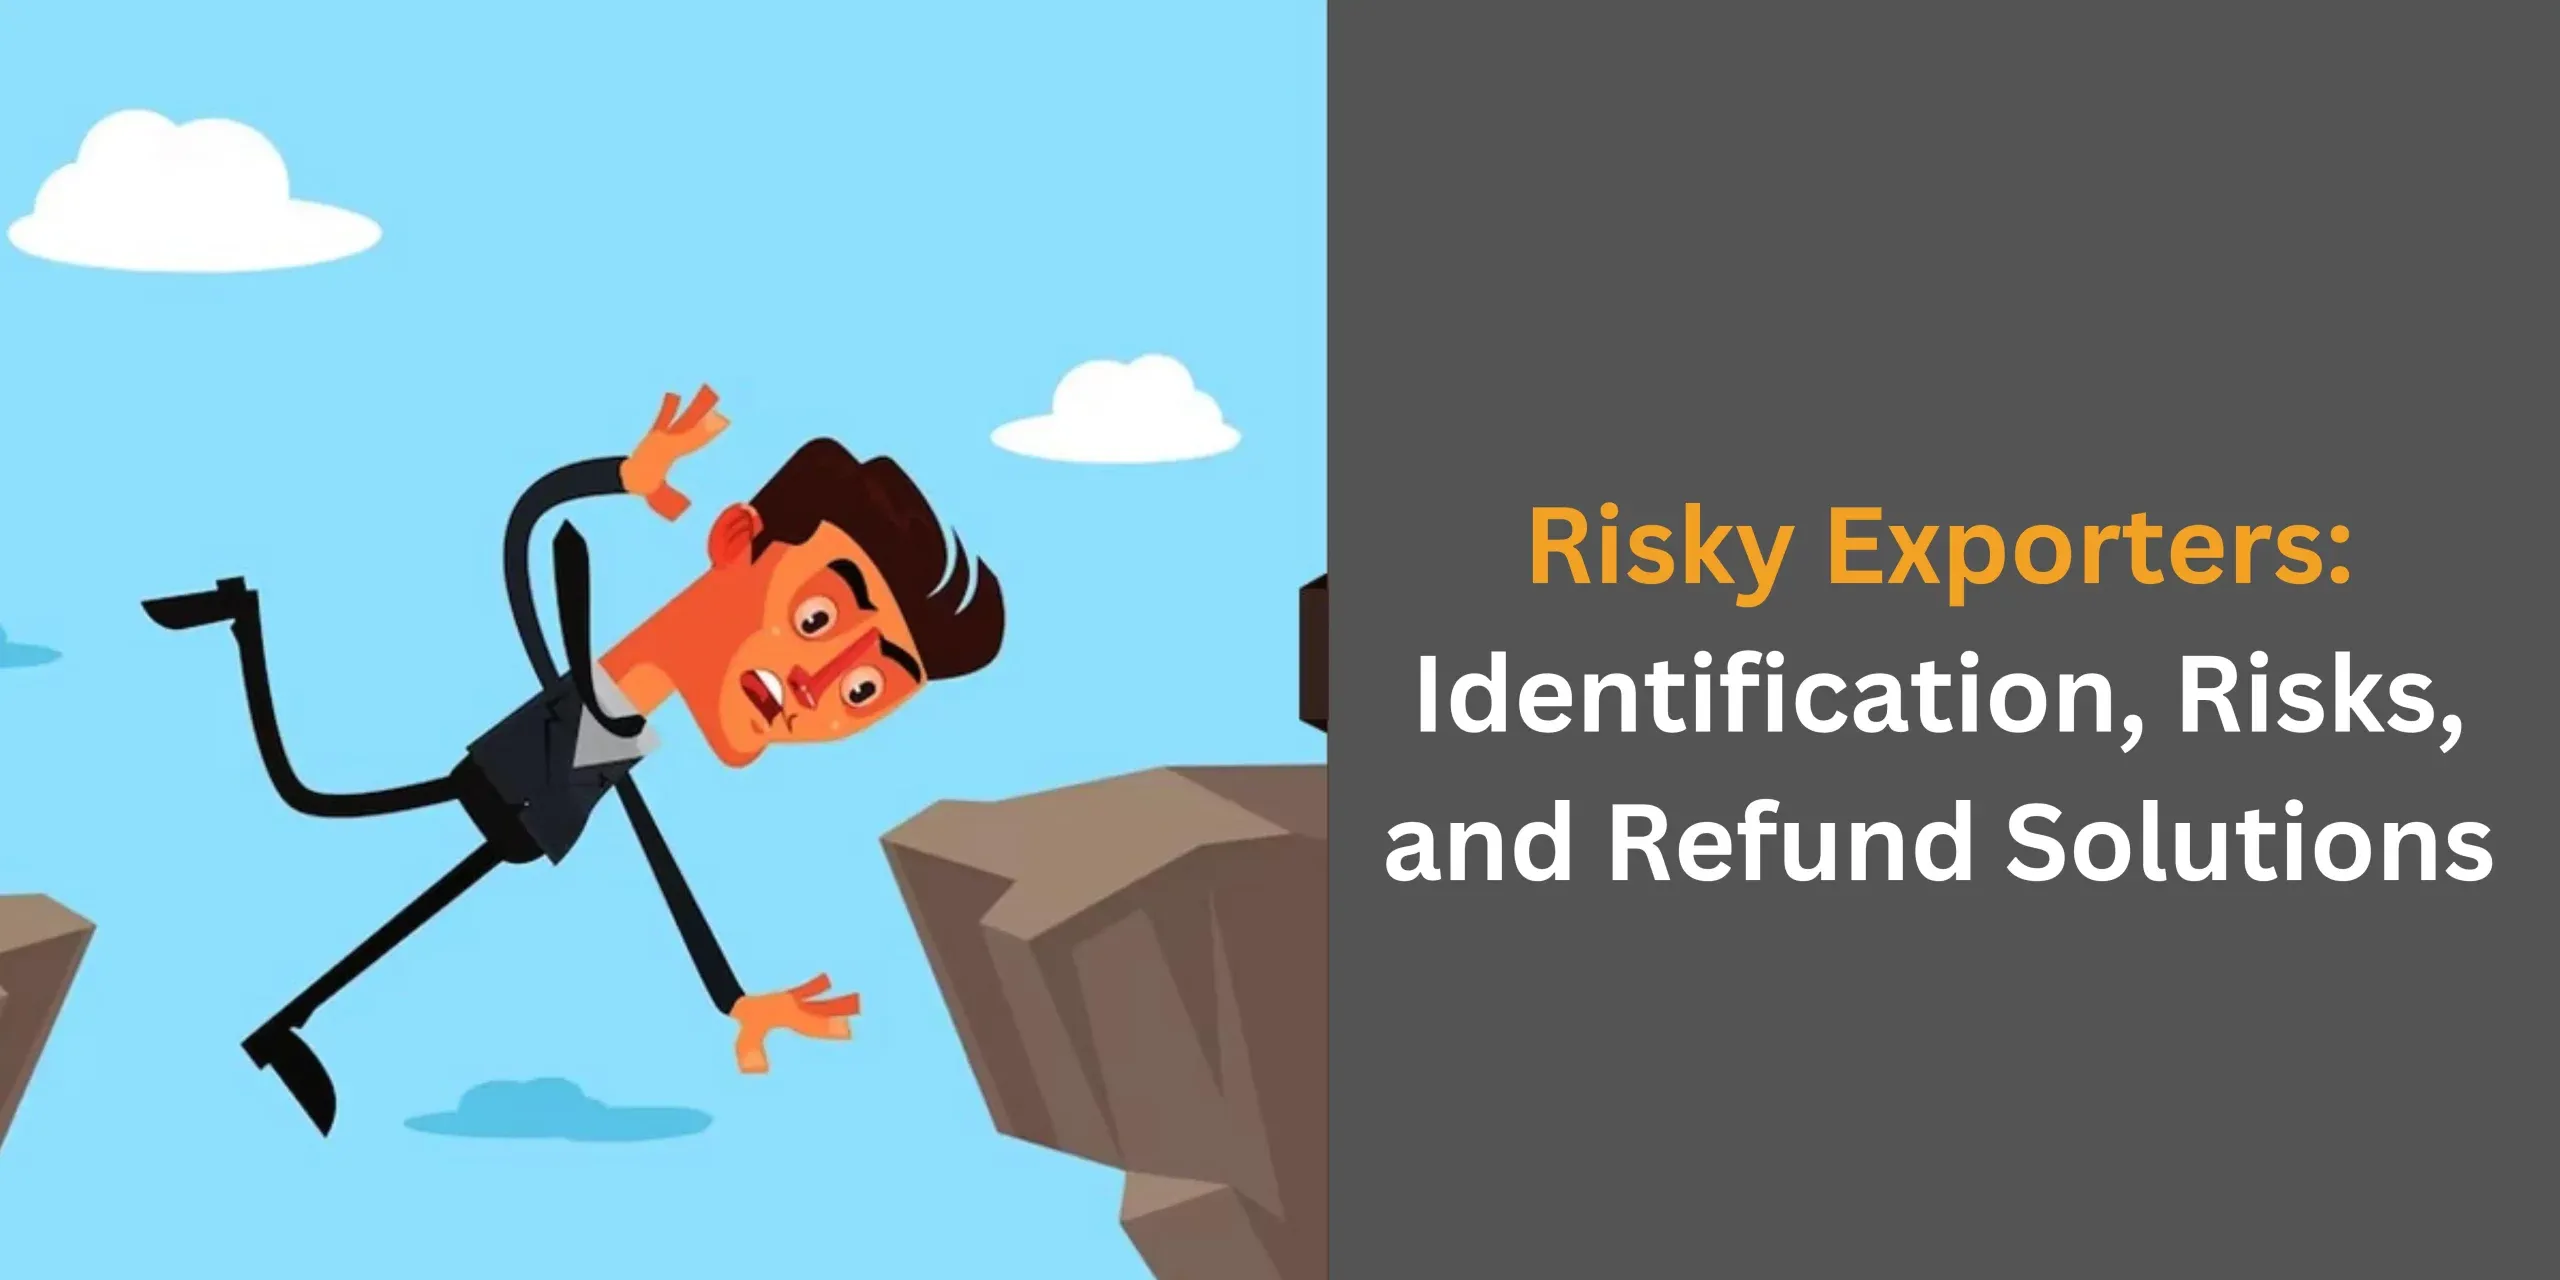 Risky Exporters: Identification, Risks, and Refund Solutions